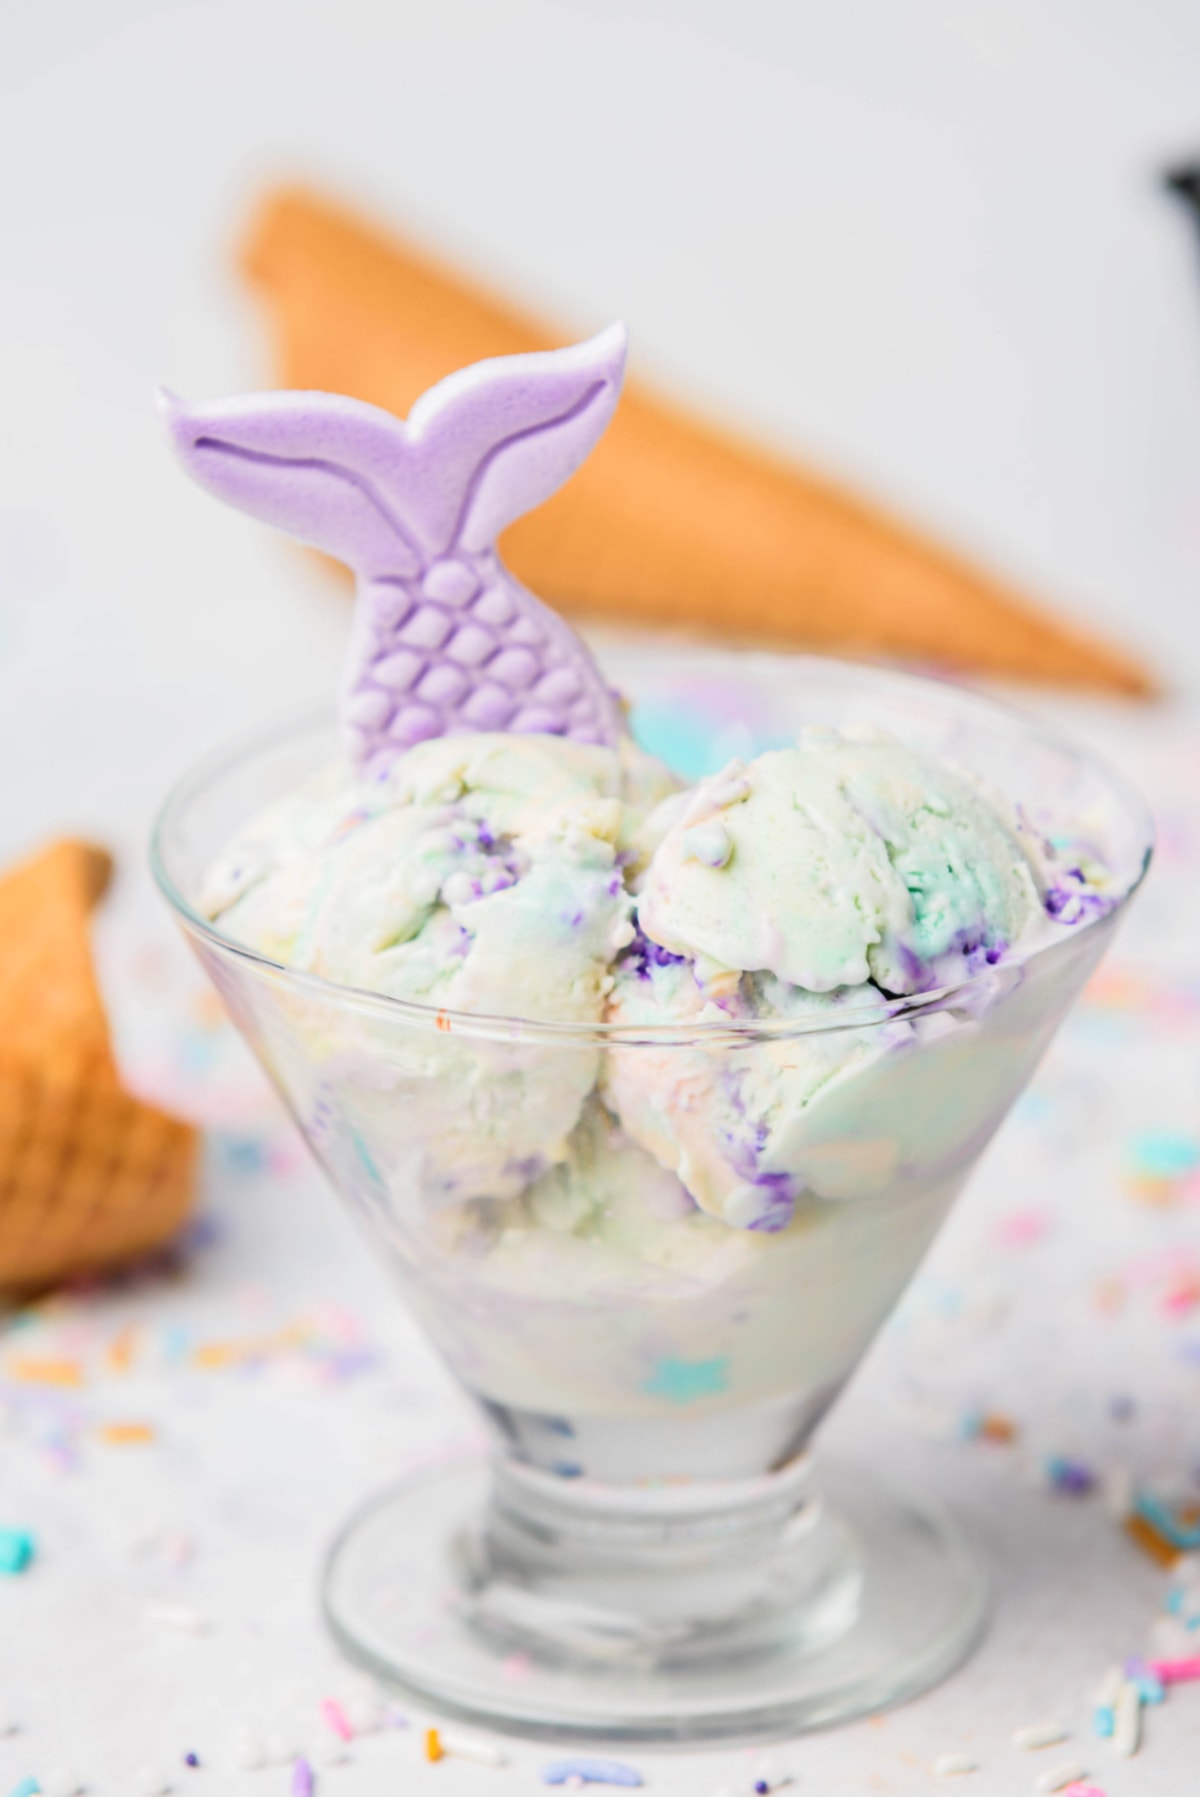 Ice cream with mermaid tail in glass